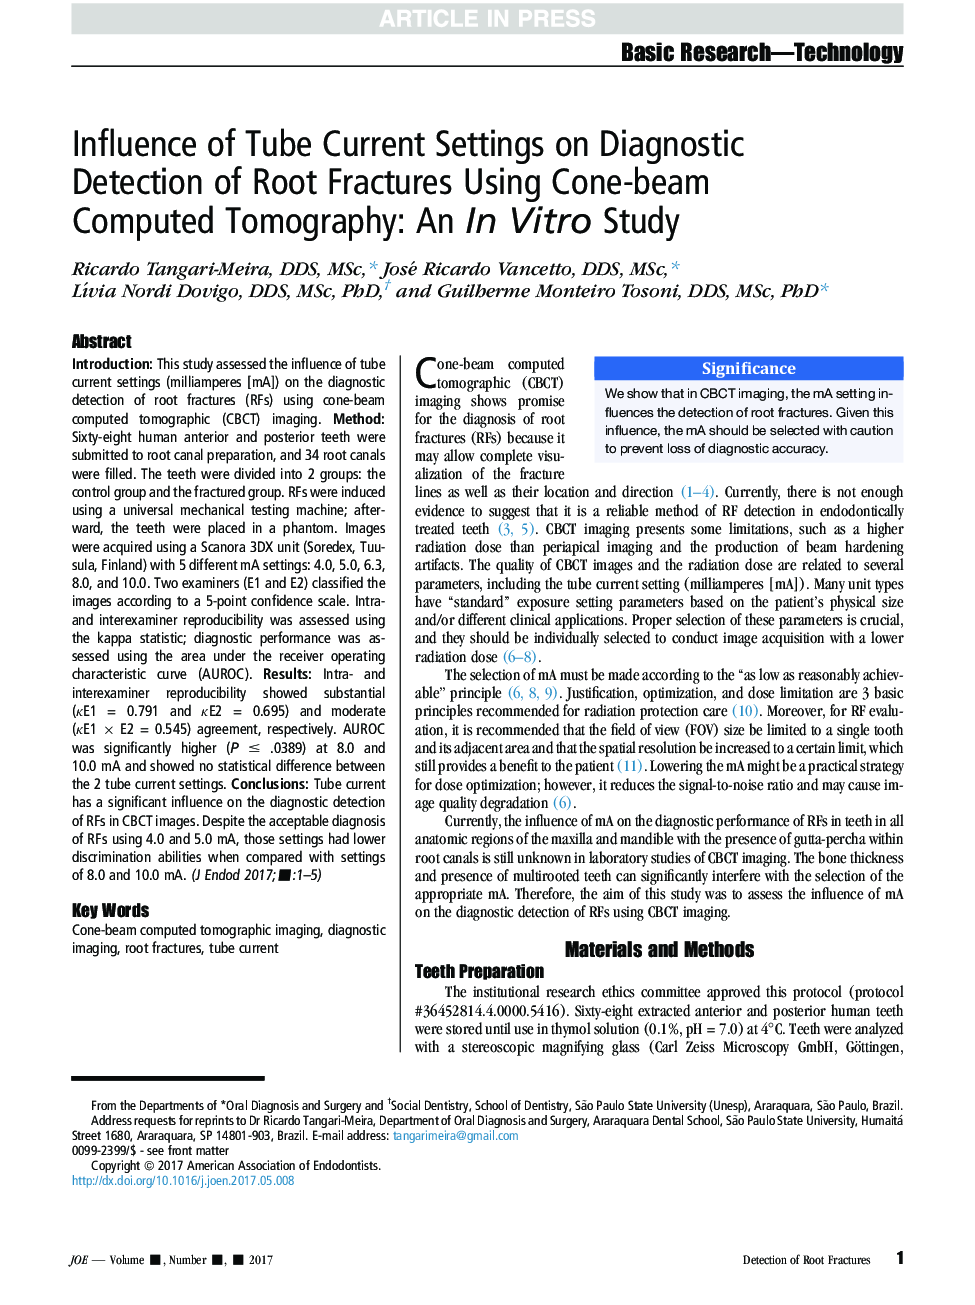 Influence of Tube Current Settings on Diagnostic Detection of Root Fractures Using Cone-beam Computed Tomography: An InÂ Vitro Study